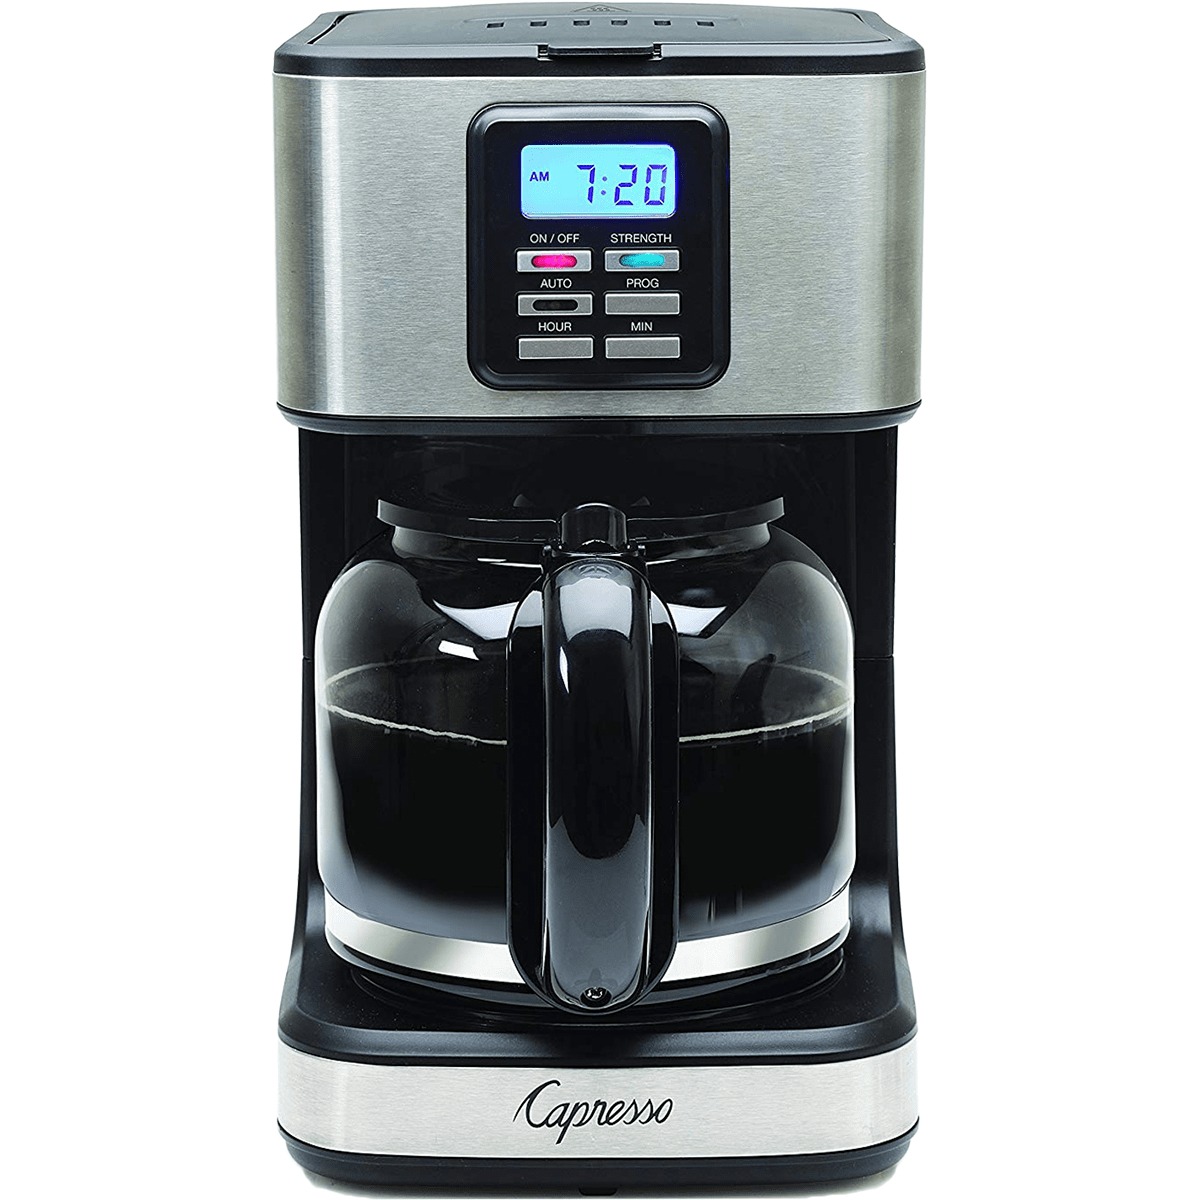 Capresso Sg220 12-cup Glass Carafe Stainless Steel Coffee Maker